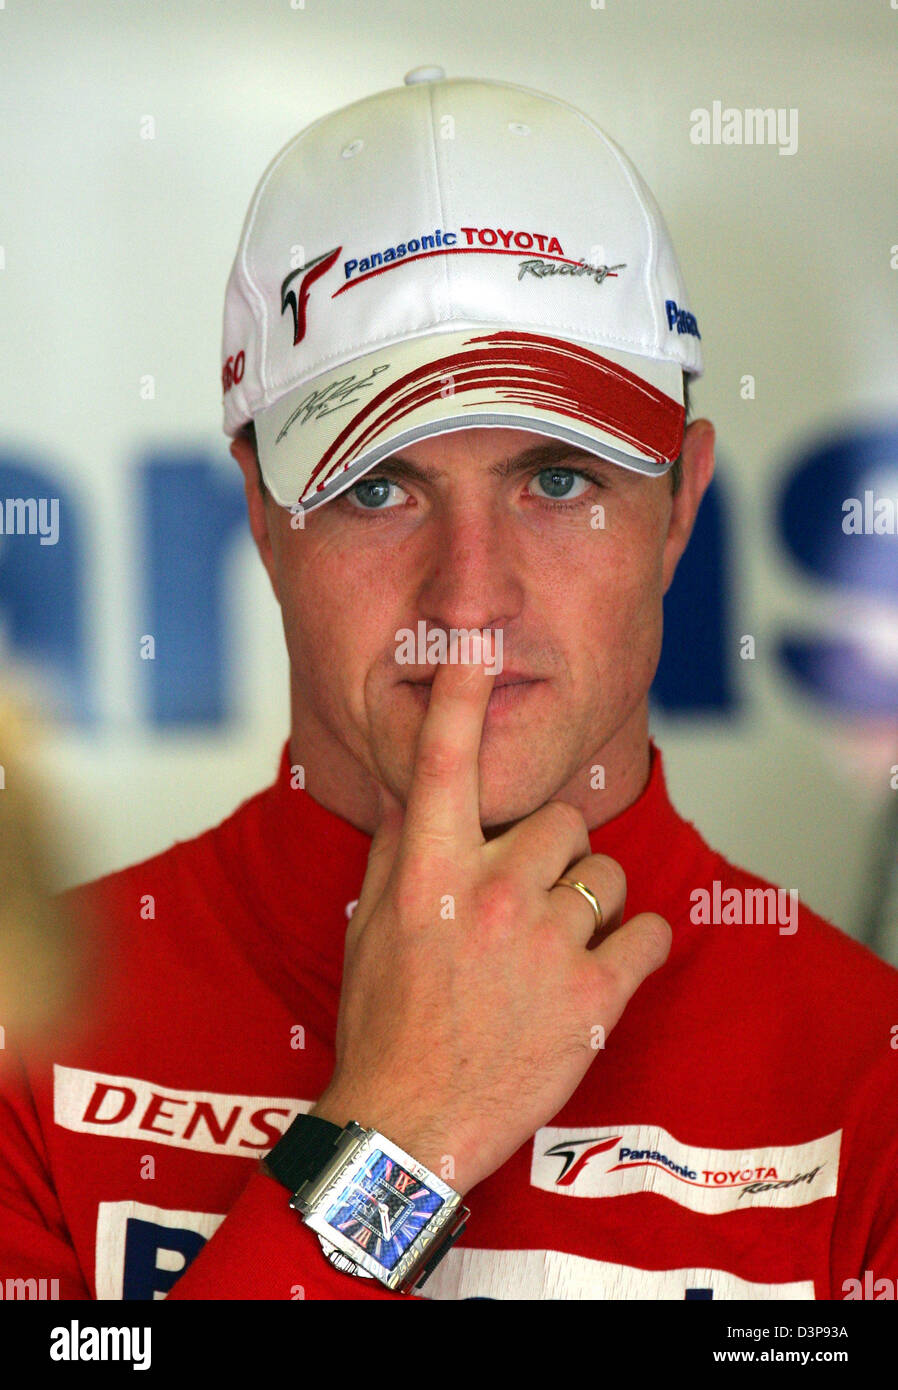 German Formula One Ralf Schumacher of Toyota F1 gestures during the first practice session to the Japanese Grand Prix at the Suzuka International Racing Course in Suzuka, Japan, Friday, 06 October 2006. The 2006 Formula 1 Japanese Grand Prix will take place here on Sunday, 08  October. Photo: Gero Breloer Stock Photo